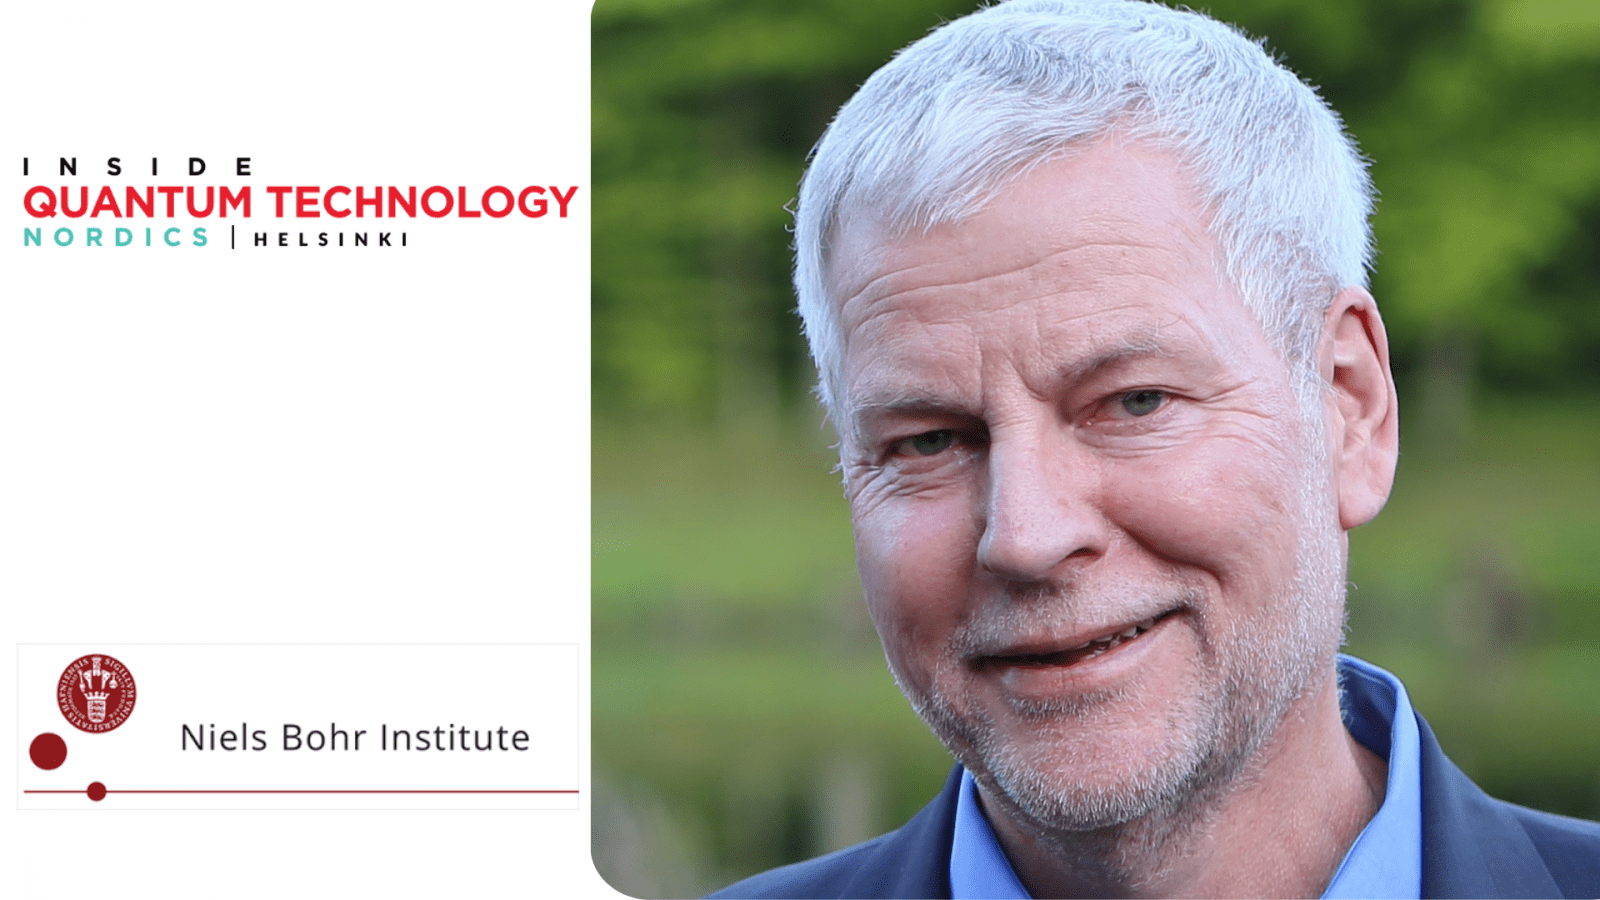 Peter Viereck, Business Development Manager at the Niels Bohr Institute, is a 2024 Speaker for the IQT Nordics conference in Helsinki.